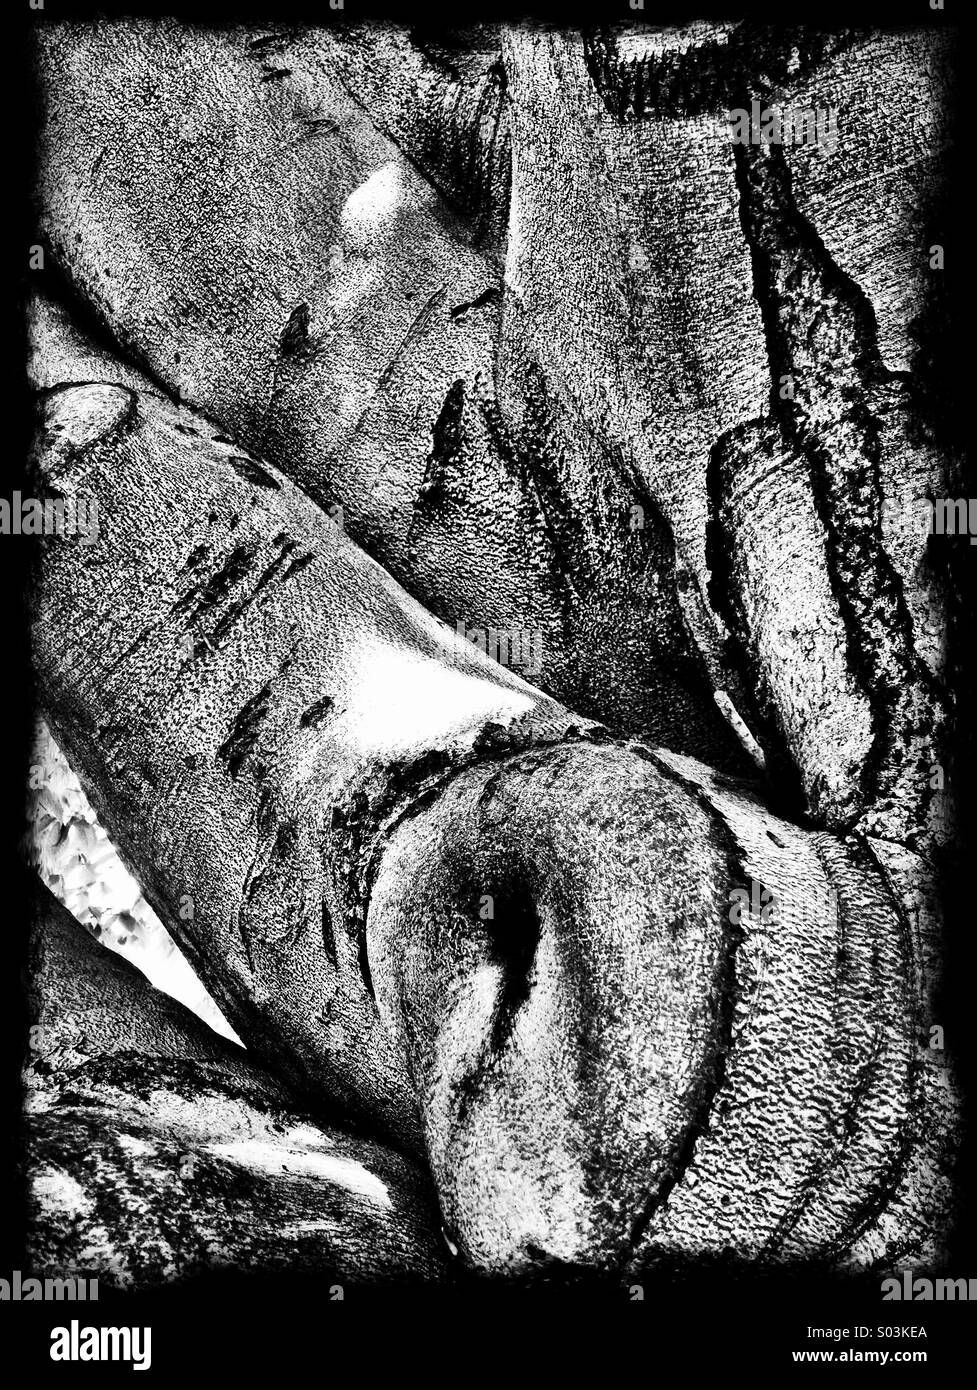 Black and white image if an old, twisted tree trunk. Stock Photo